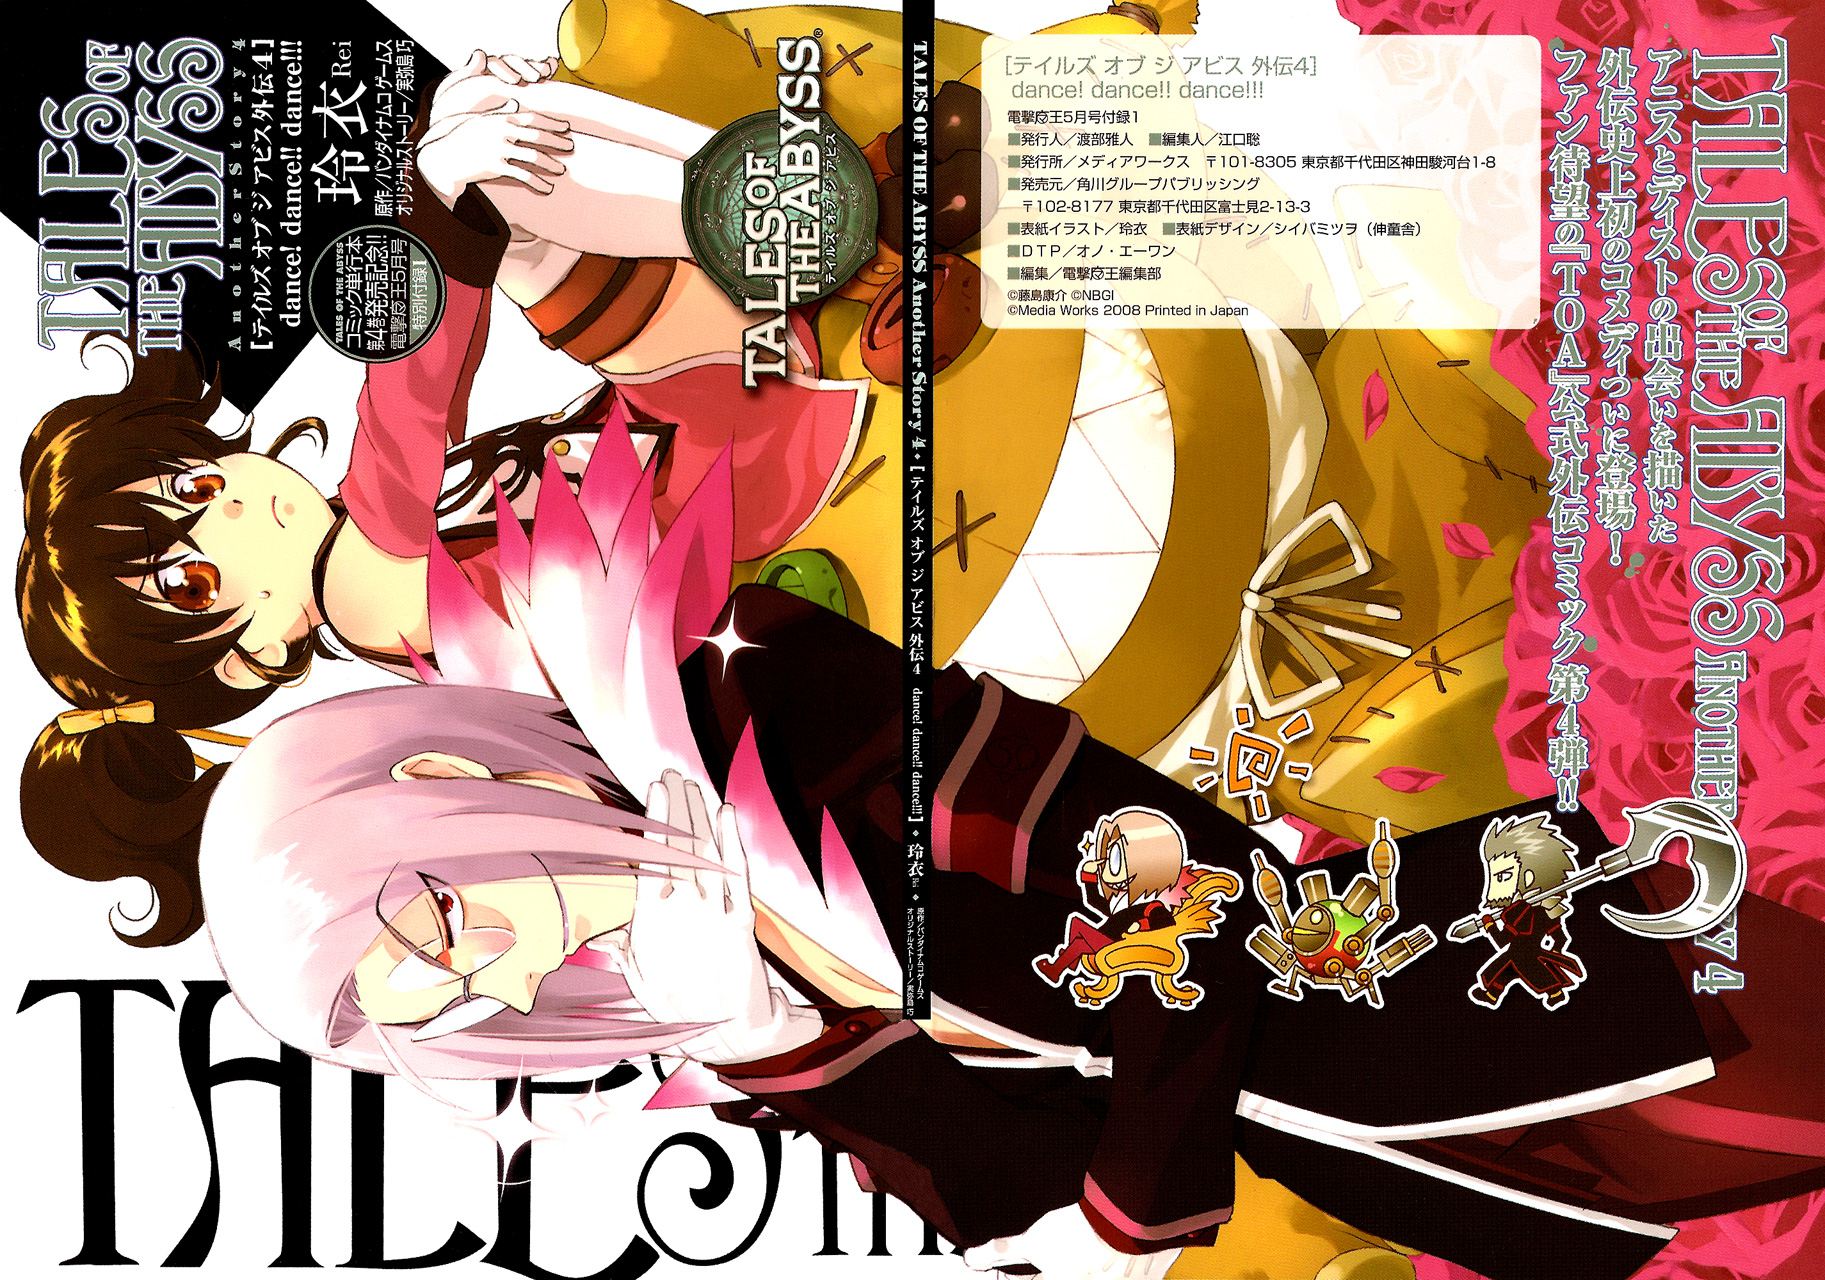 Tales Of The Abyss - Another Story Vol.4 Chapter 0 V4 : Another Story 4 - Dist And Anise Gaiden: Dance!dance!!dance!!! - Picture 1